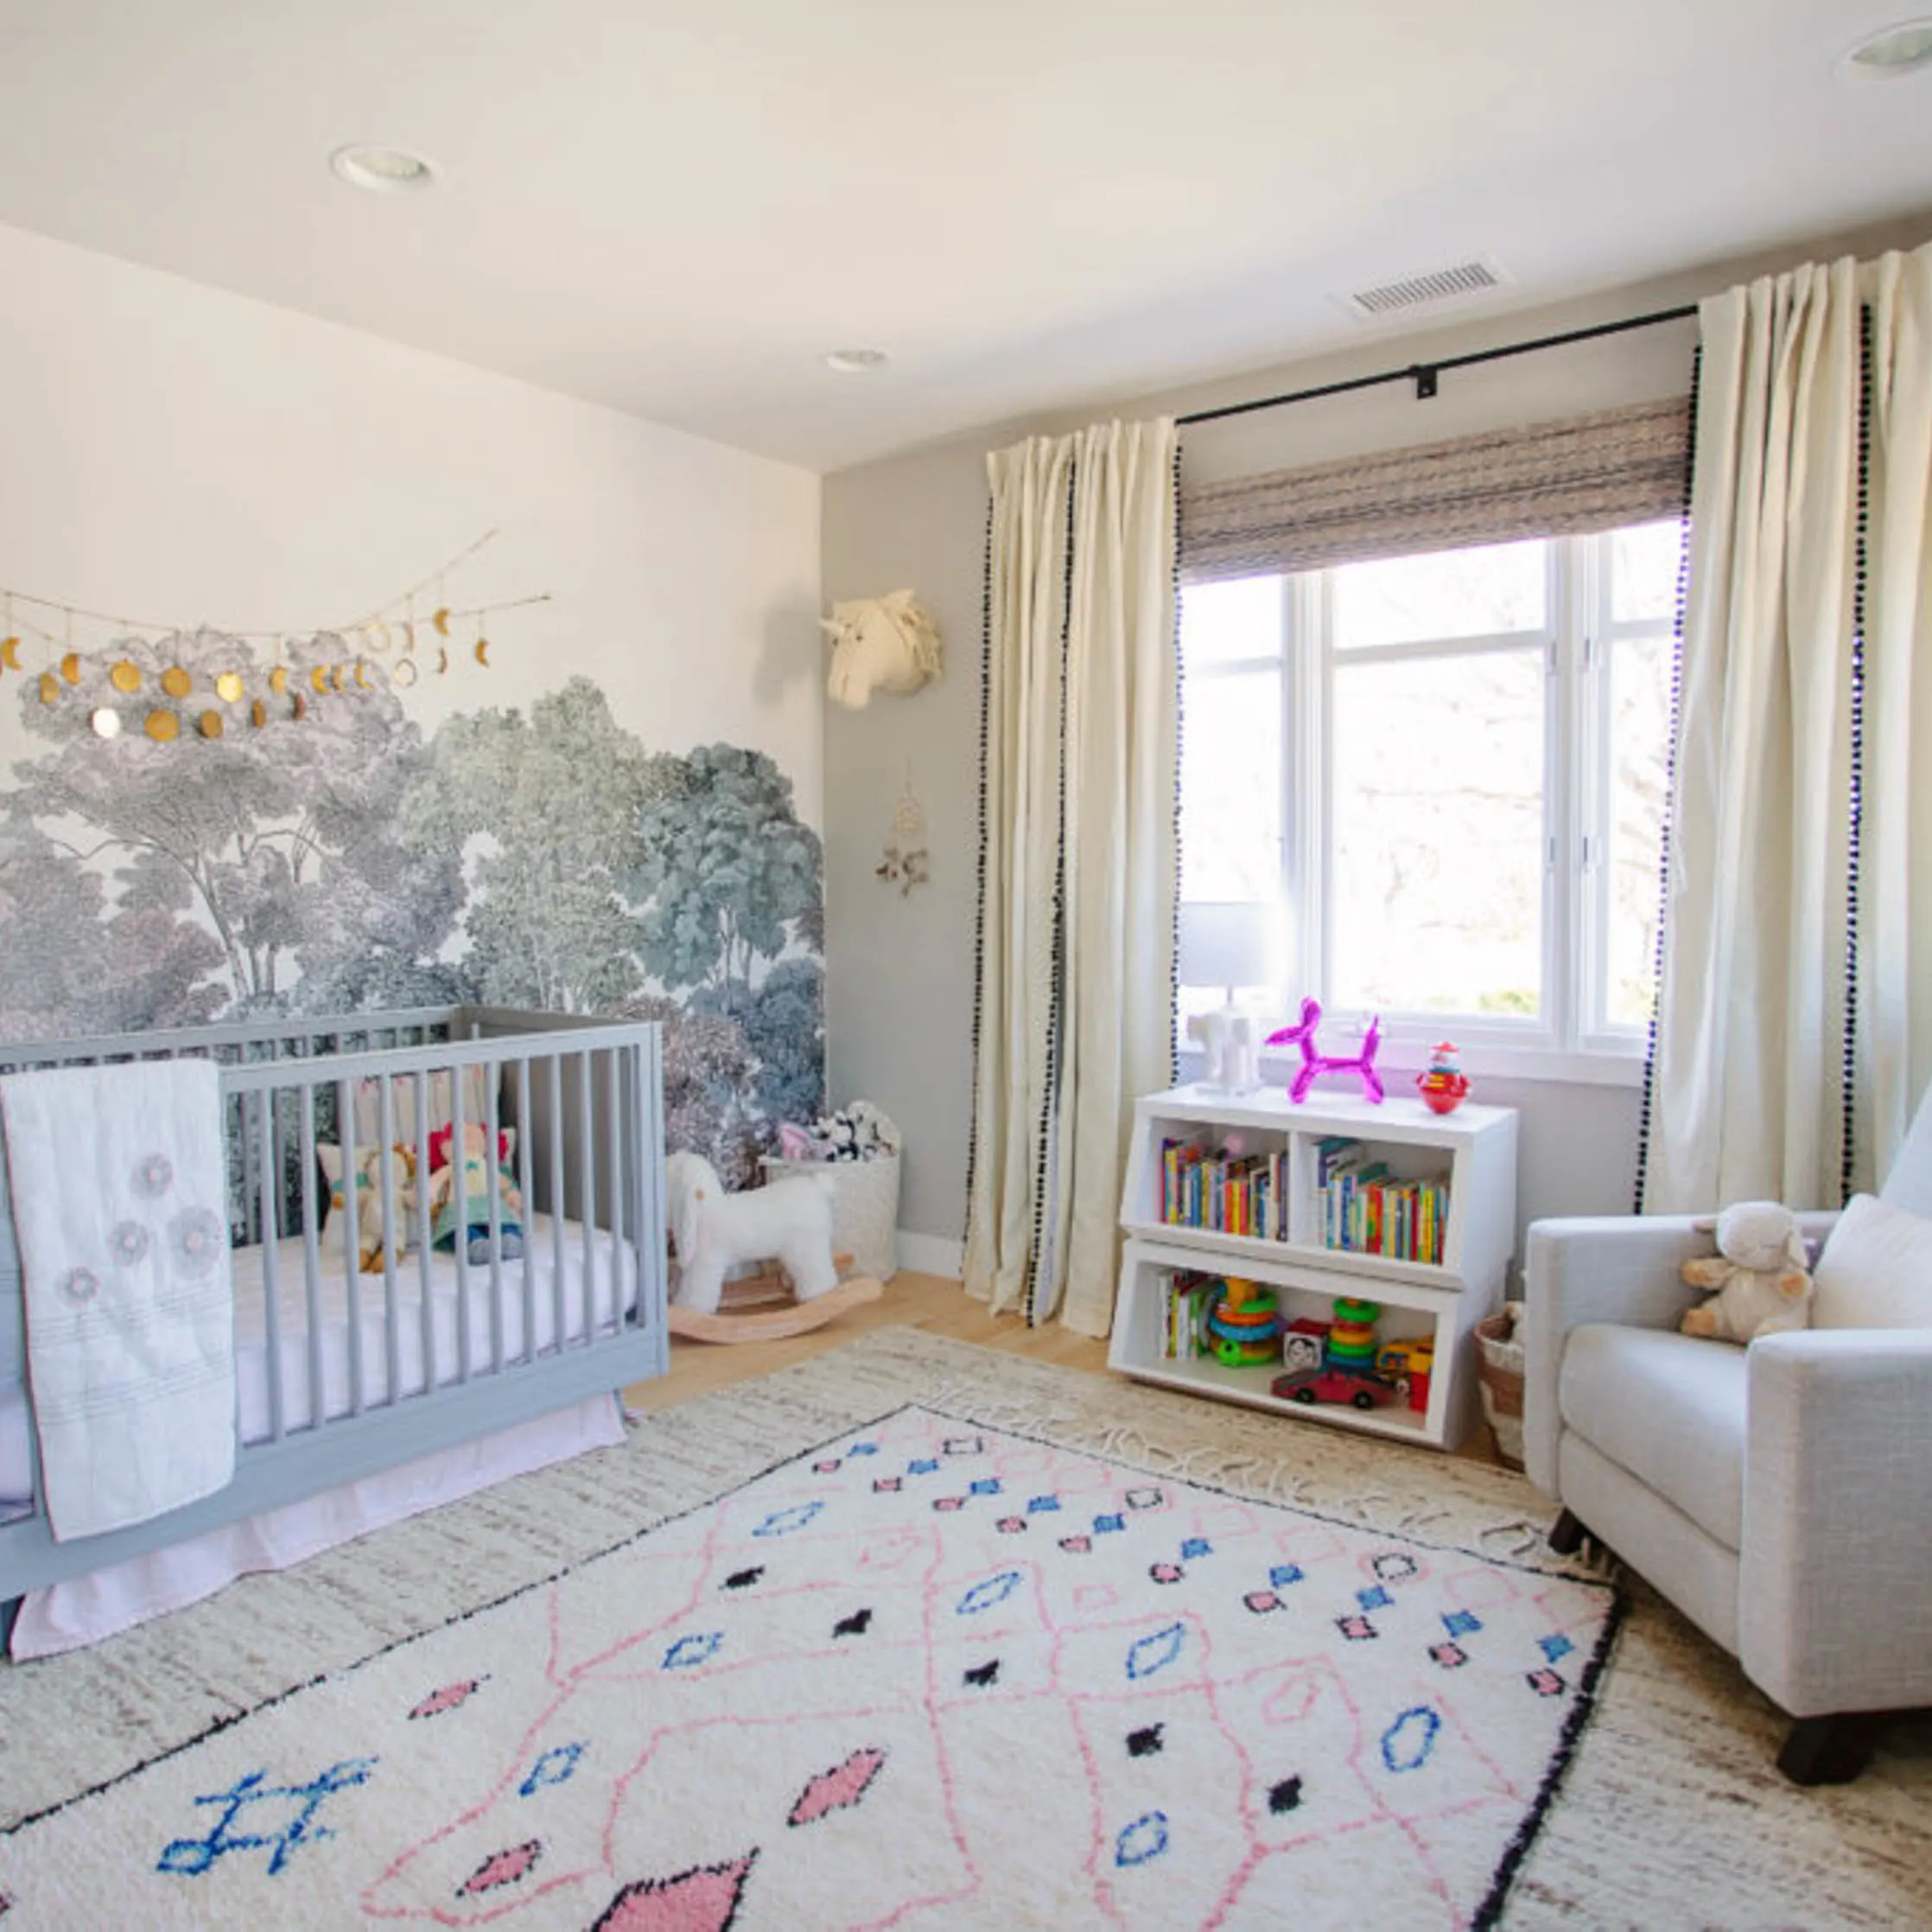 How to Choose a Rug for the Nursery